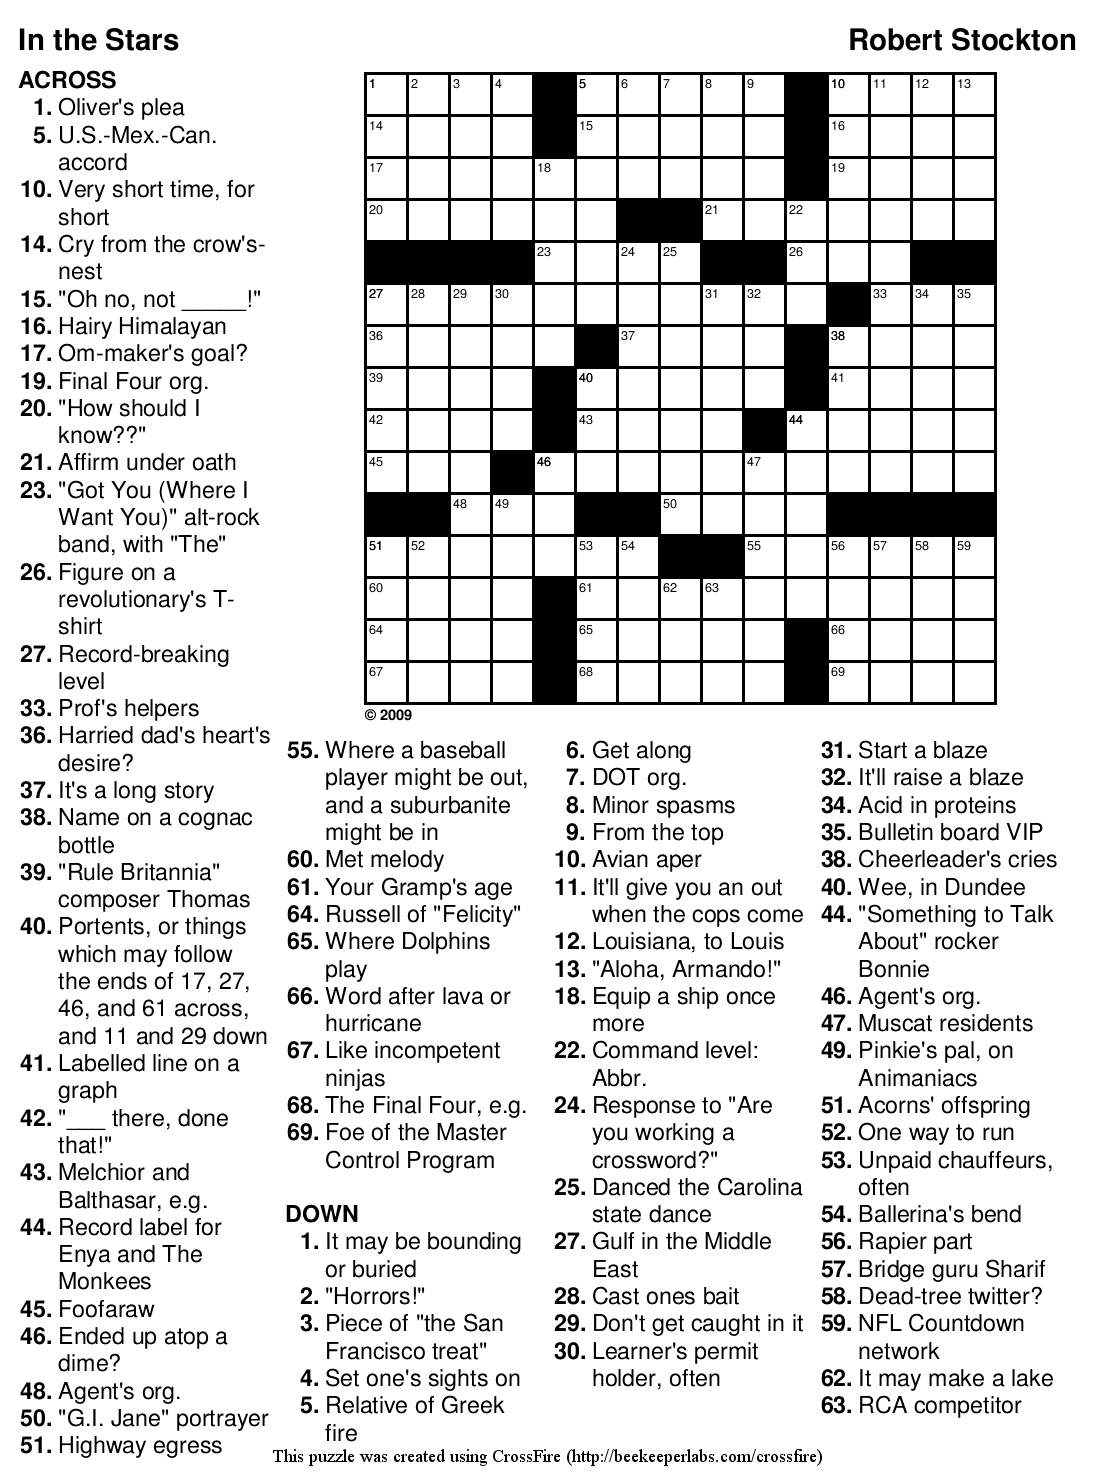 Coloring ~ Coloring Free Large Print Crosswords Easy For Seniors - Daily Crossword Puzzle Printable Thomas Joseph